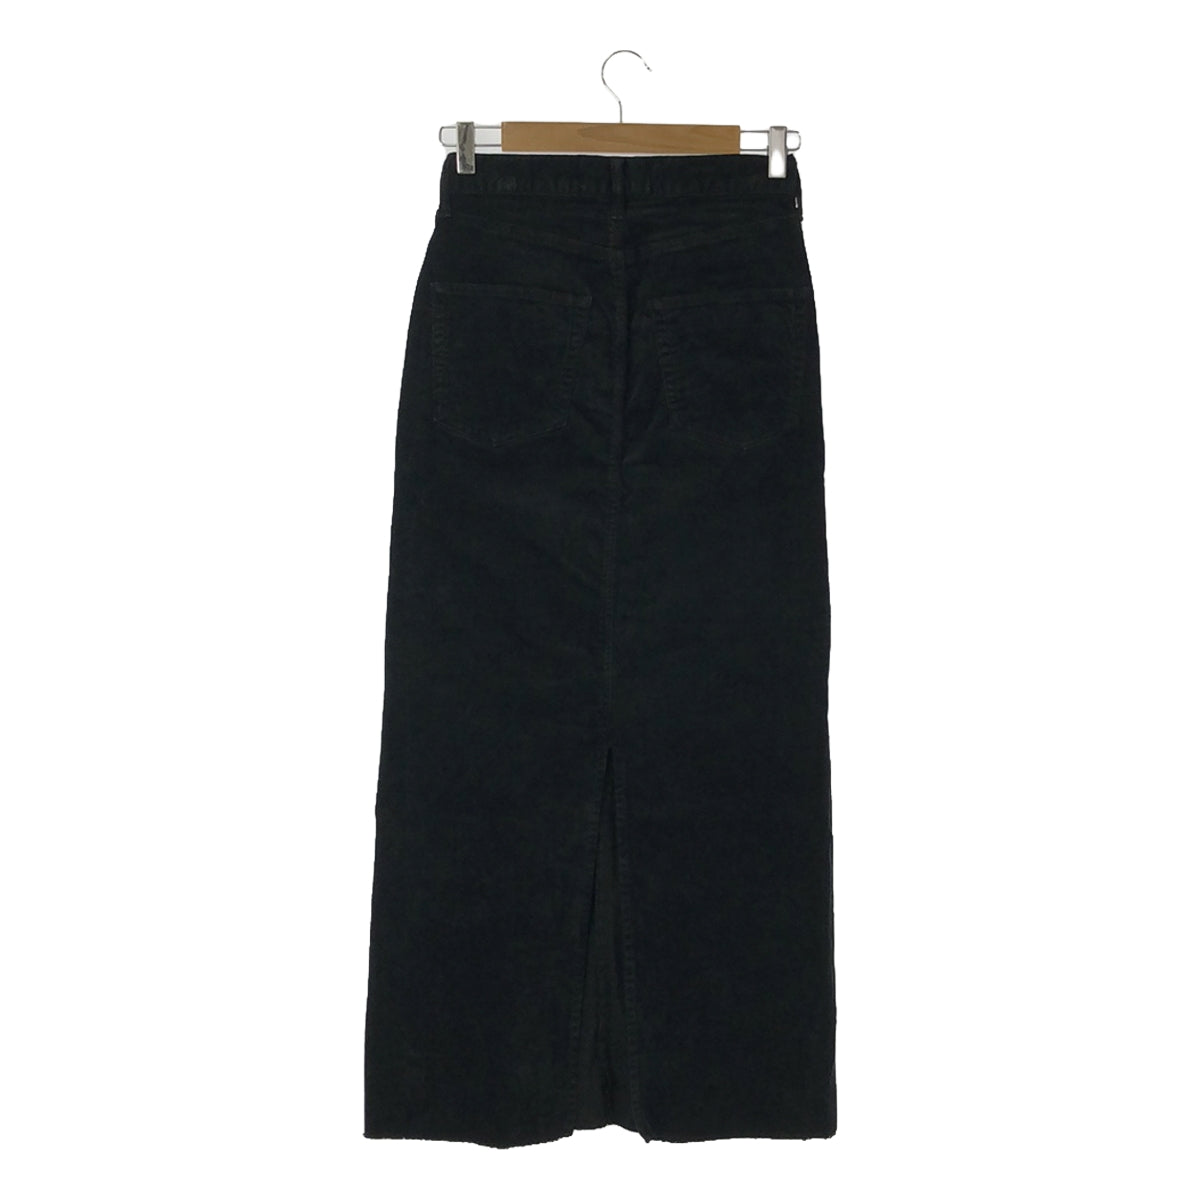 REMI RELIEF / レミレリーフ | 2021AW | L'Appartement別注 Corduroy Long Skirt ロングスカート | S |